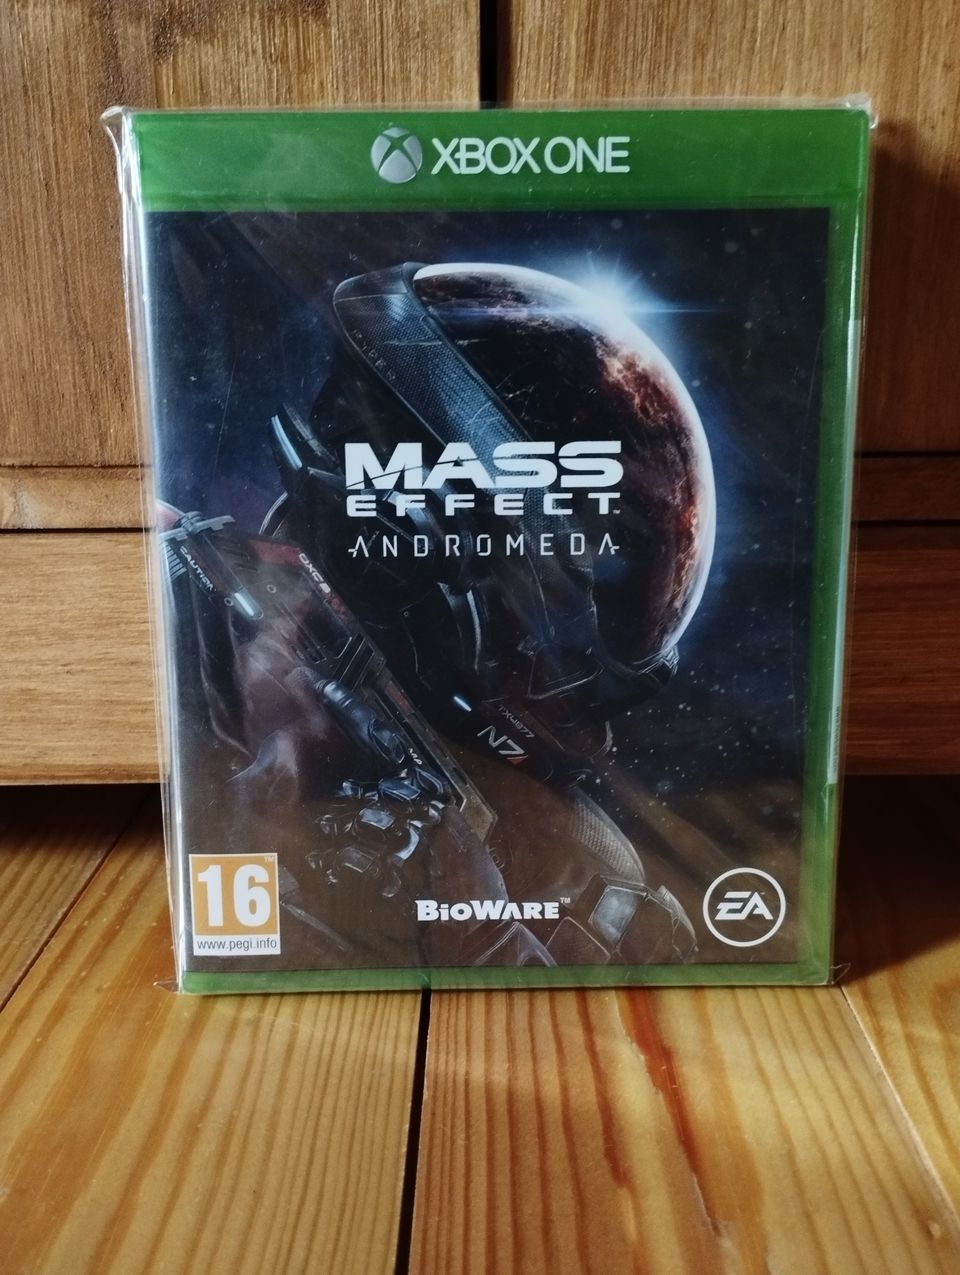 Mass effect andromeda Xbox one